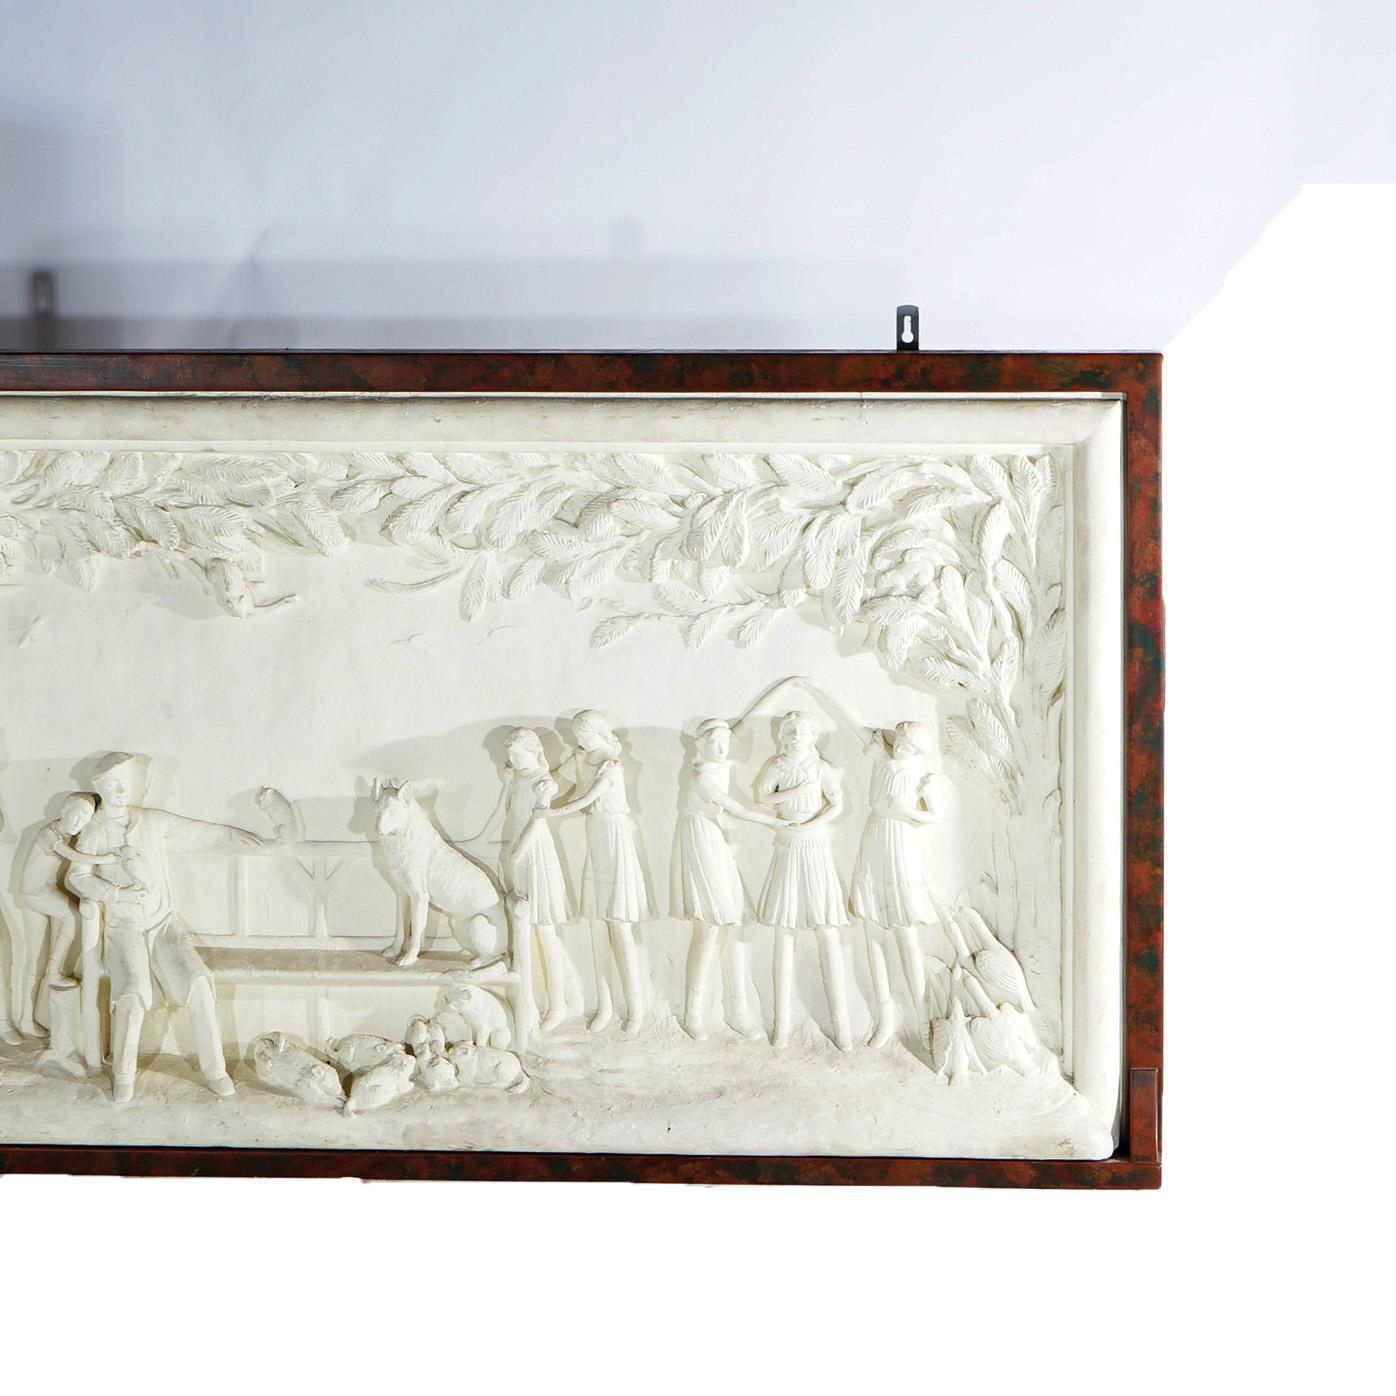 20th Century Large Antique Framed Figural Plaster Grouping In High Relief, Farm Scene, c1920